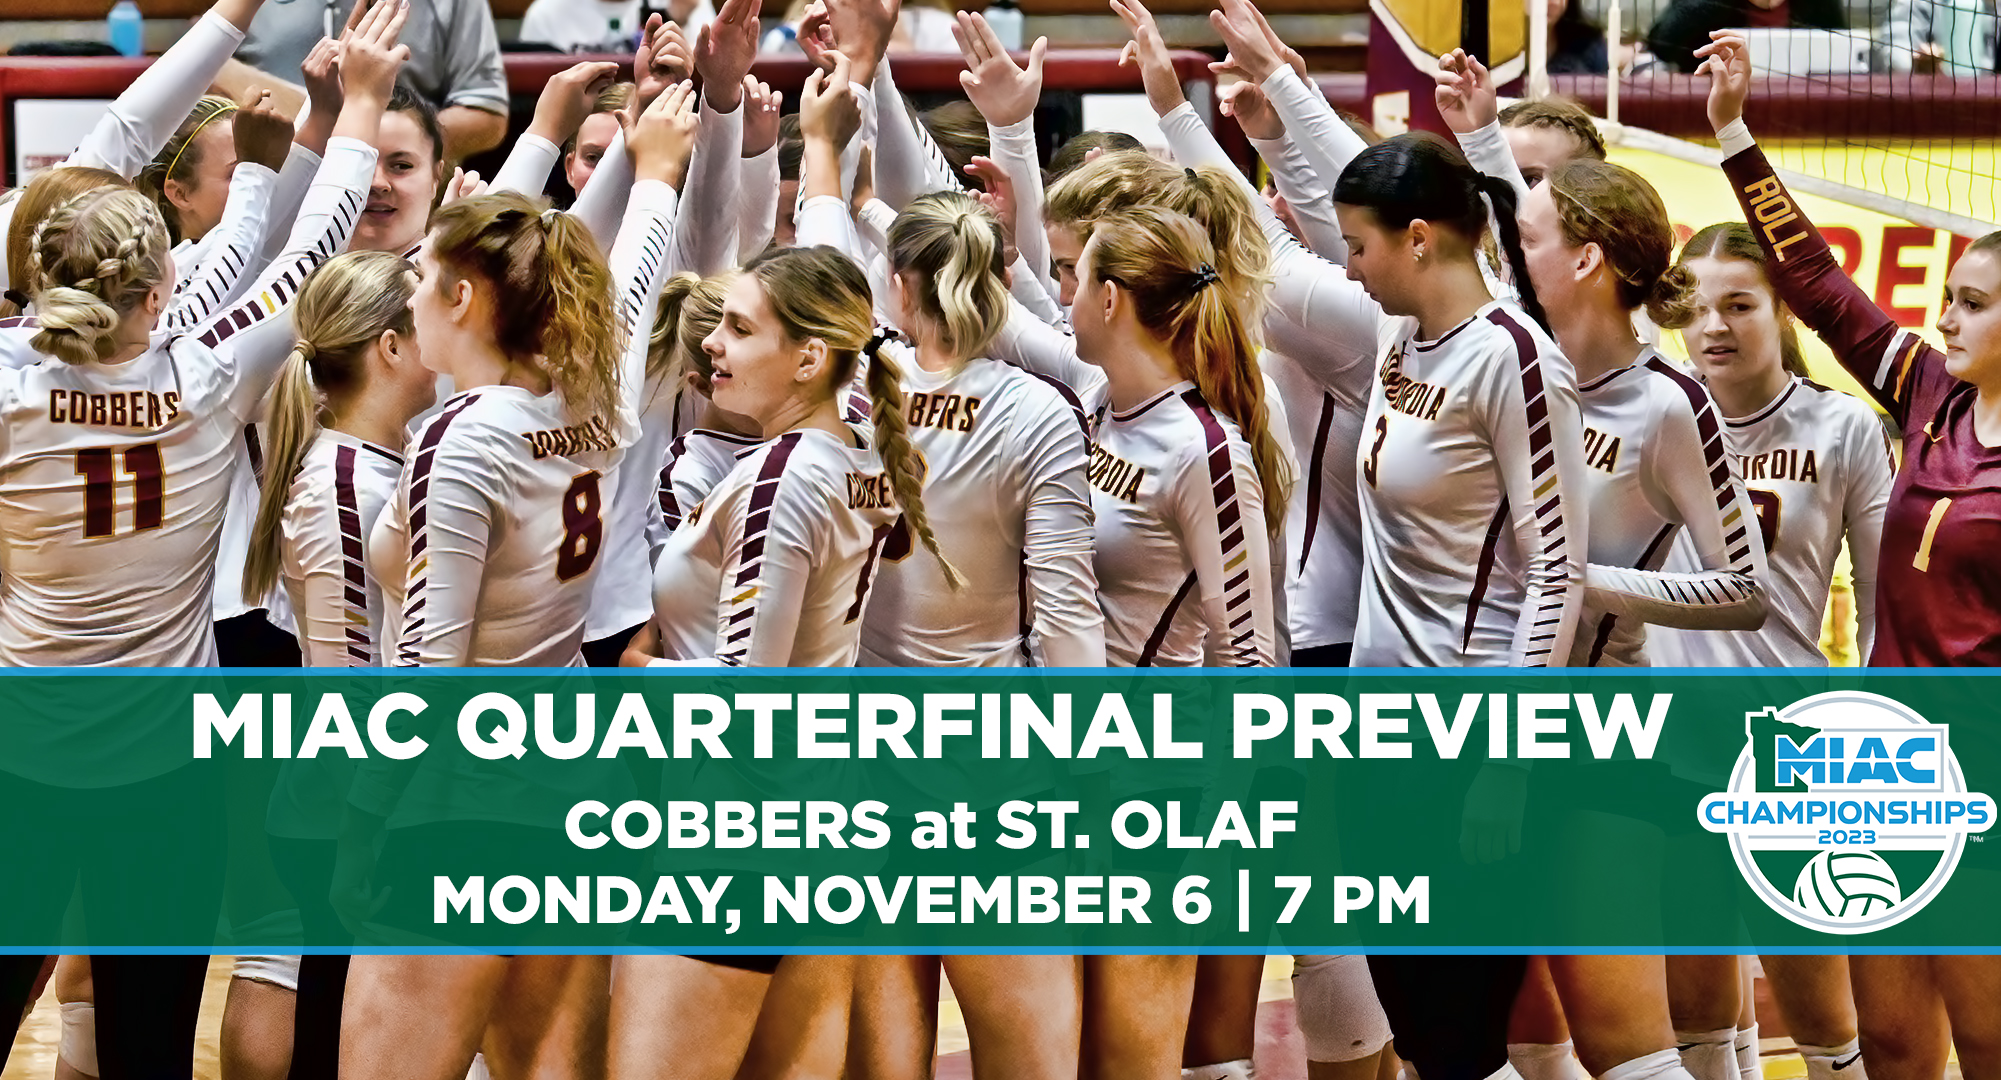 Concordia will play at St. Olaf in the quarterfinals of the MIAC volleyball tournament on Monday, Nov. 6. at 7 p.m.